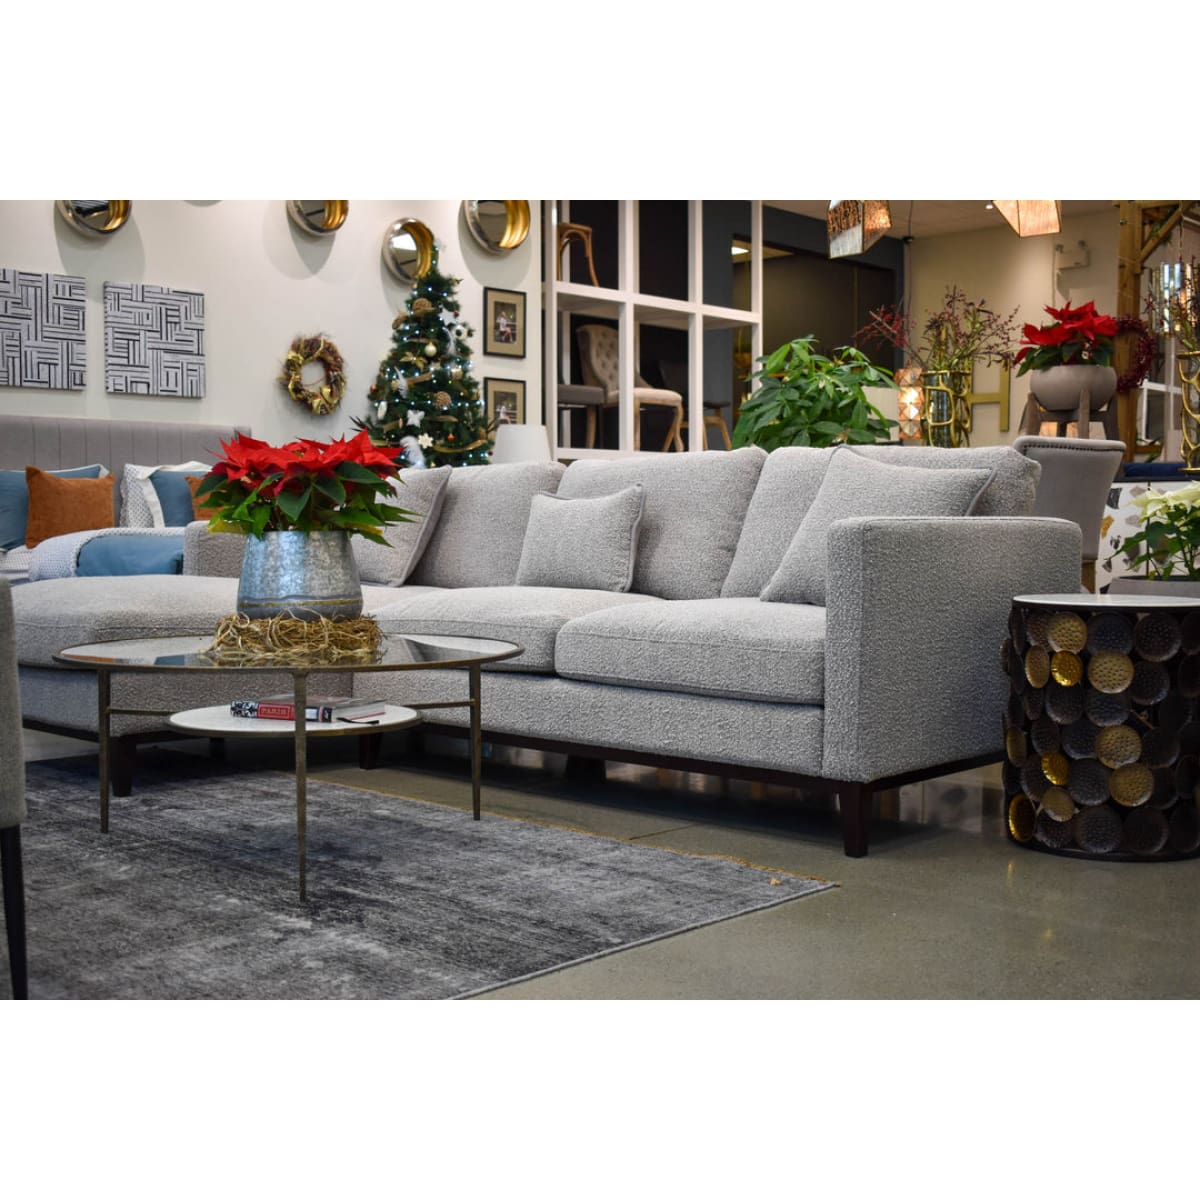 Burbank Sofa Lhf Sectional - lh-import-sectionals